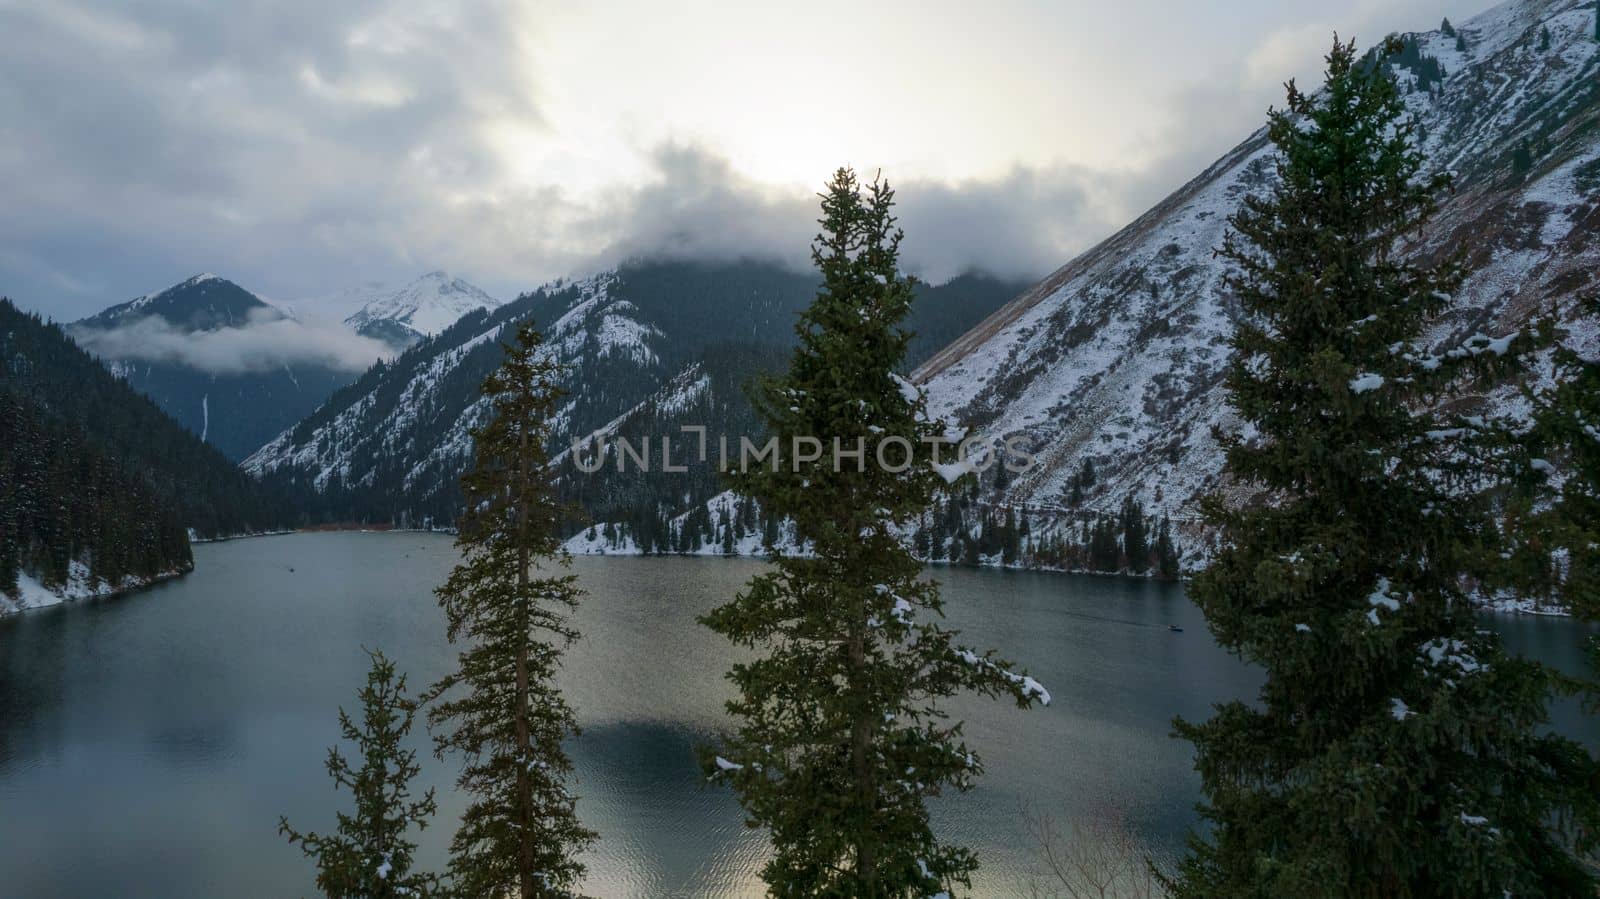 Kolsai mountain lake in the winter forest. Drone view of coniferous trees, mirror-smooth water like a mirror, hills, mountains in snow and clouds. Yellow sunset. Boats float in places. Kazakhstan